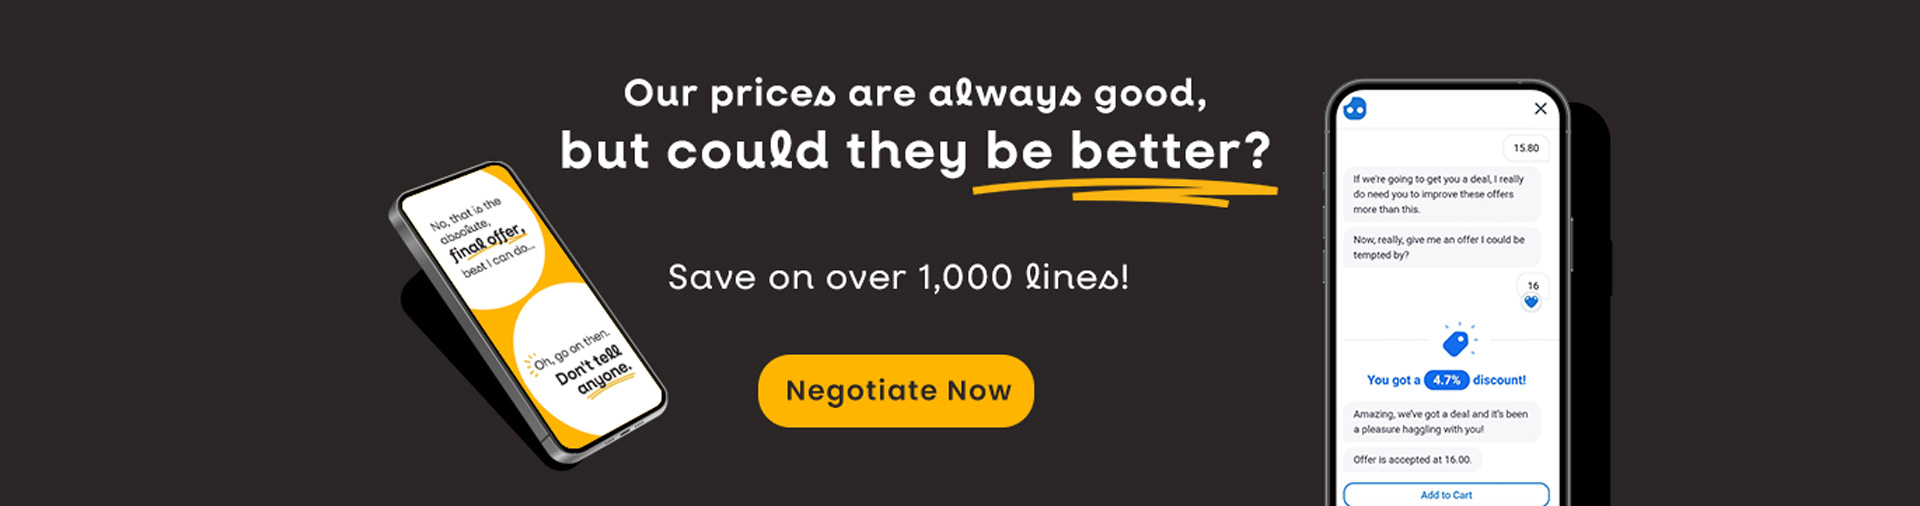 Our prices are always good, but could they be better? Negotiate now & save on over 1000 lines!